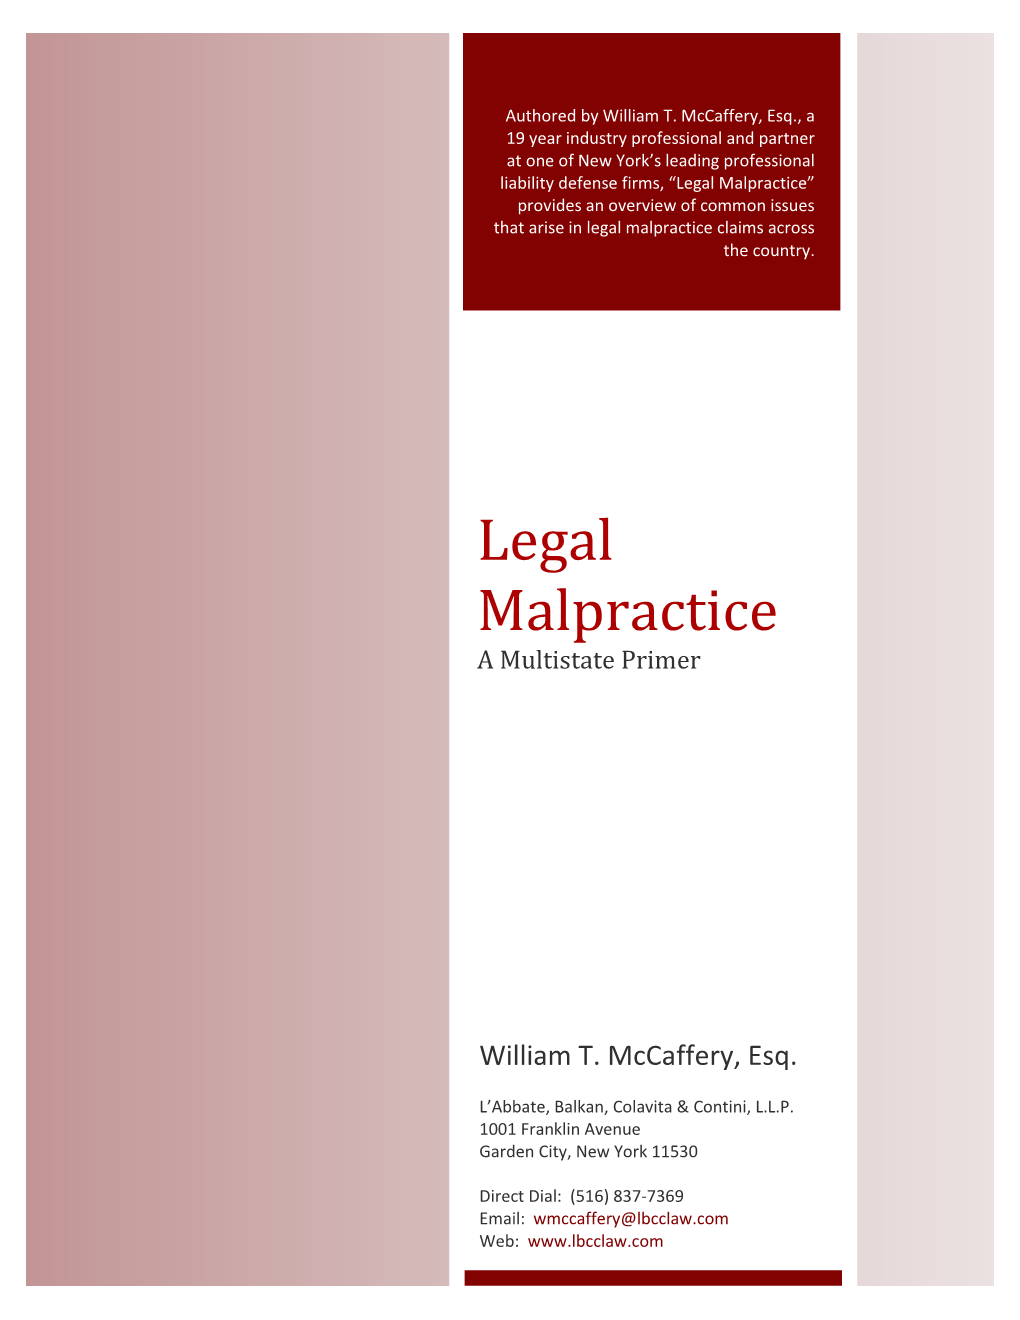 Legal Malpractice” Provides an Overview of Common Issues That Arise in Legal Malpractice Claims Across the Country